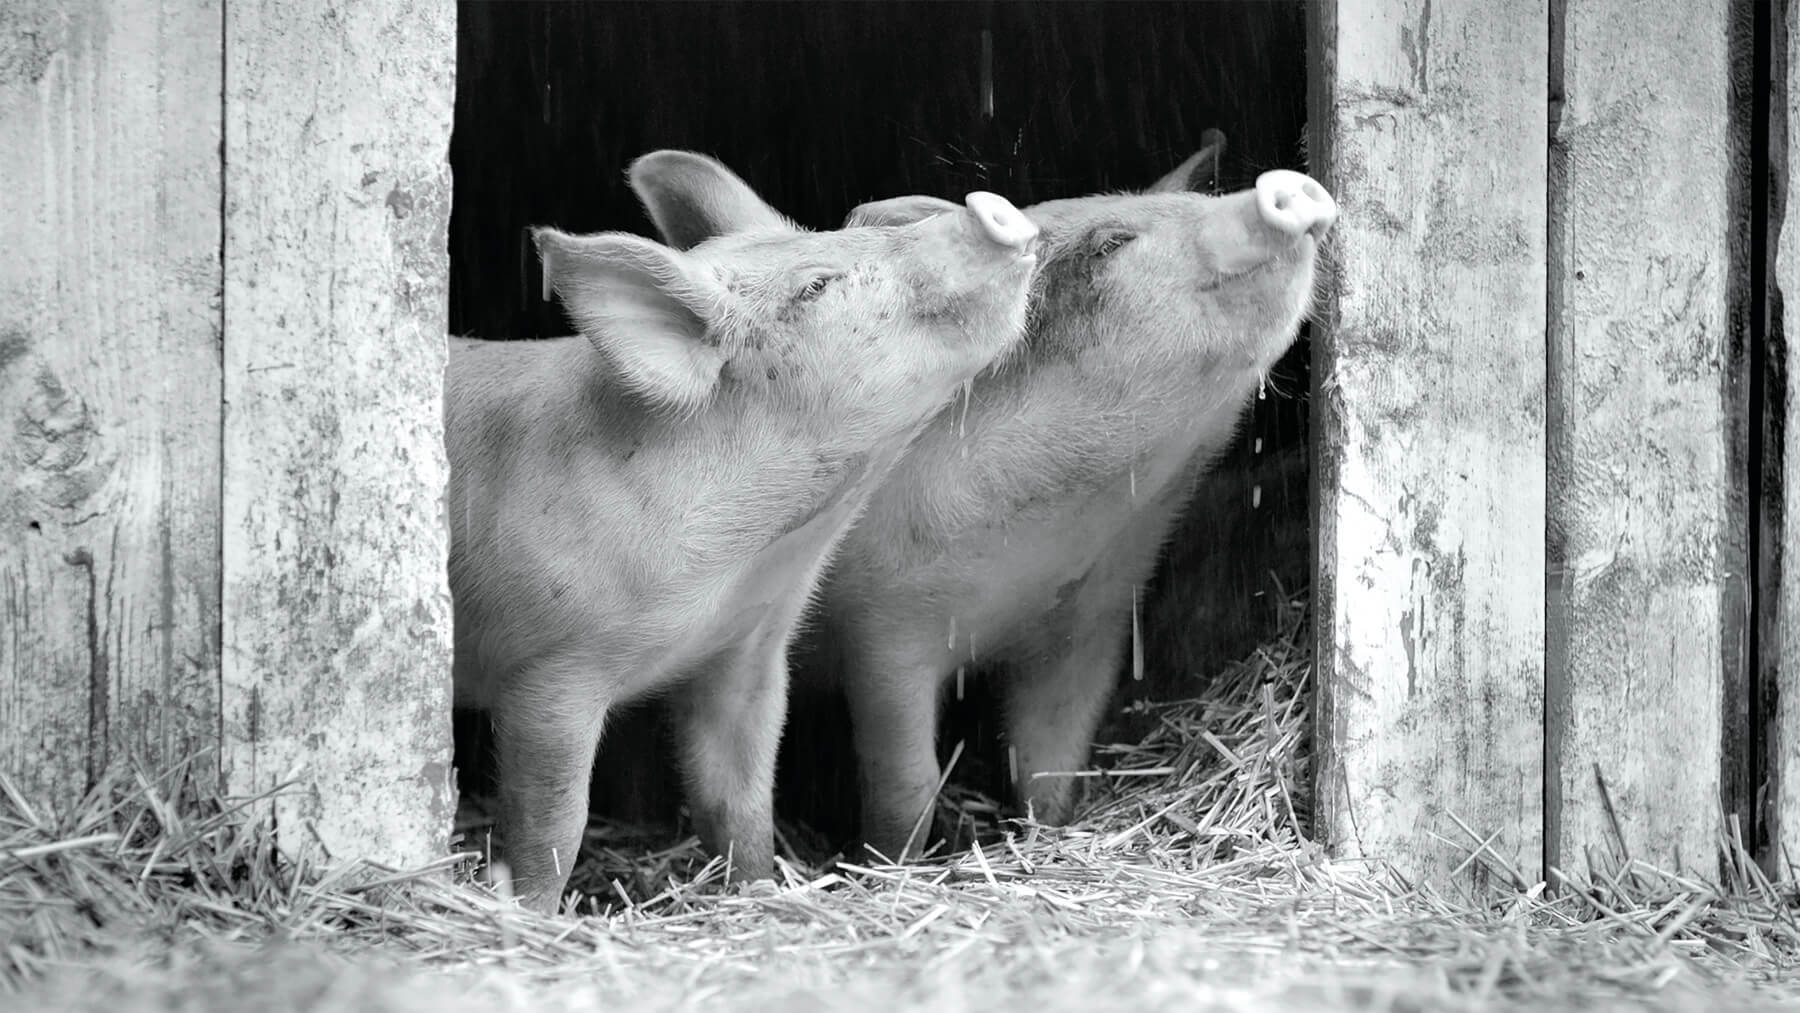 On location of Gunda, two piglets collect falling rain on their snouts